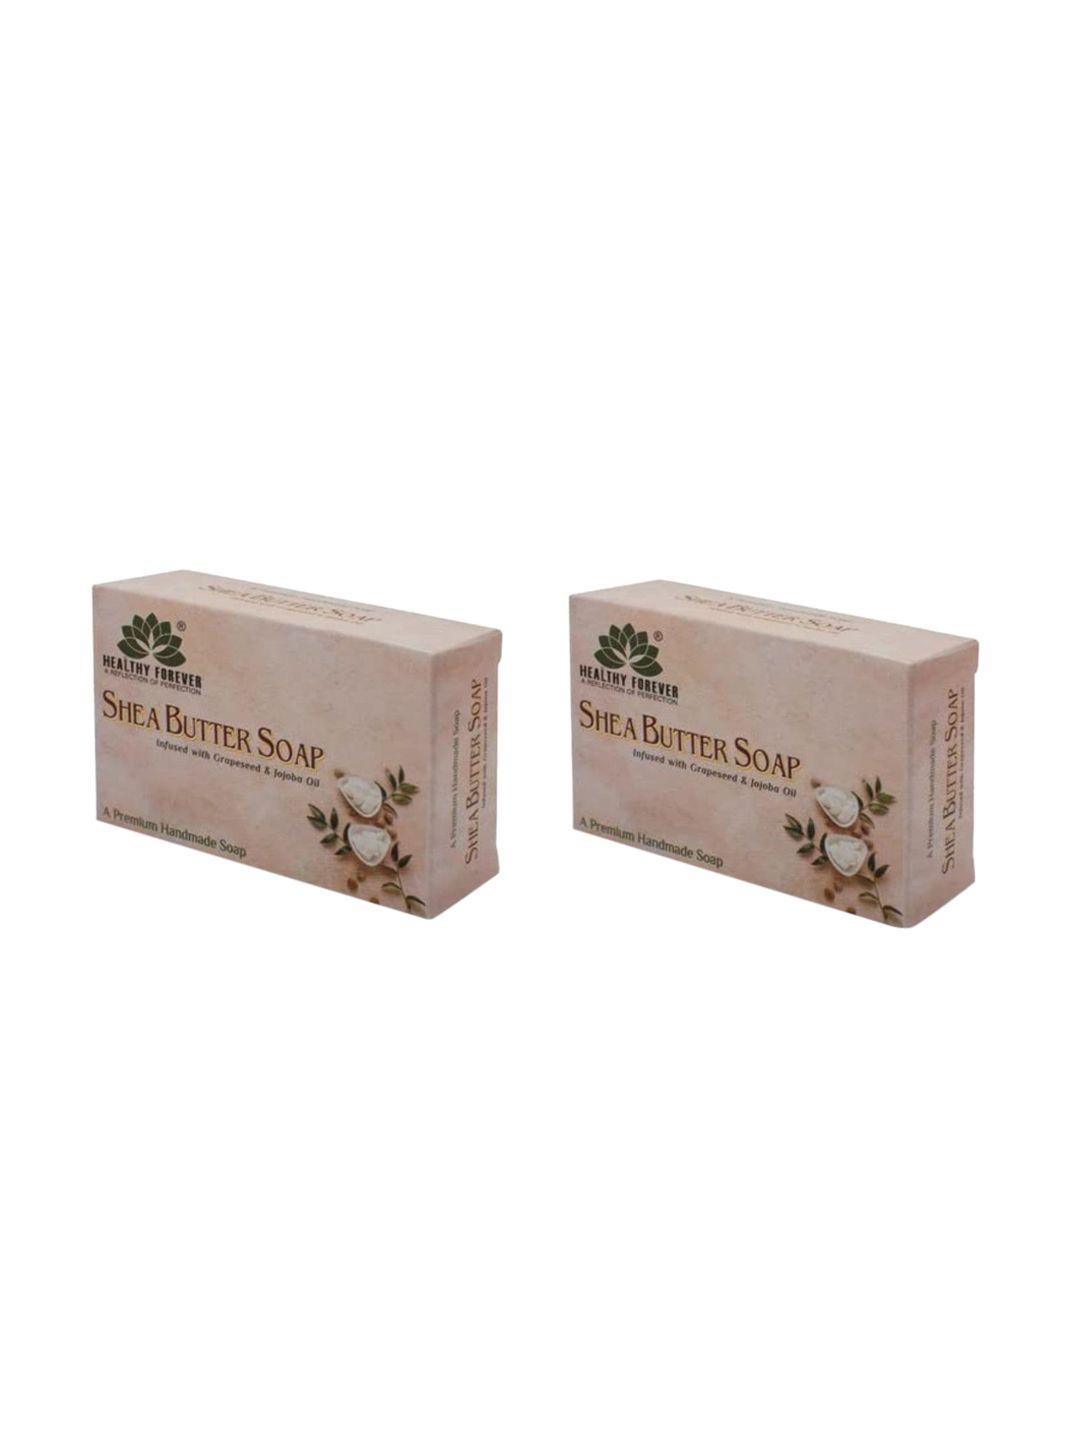 healthy forever set of 2 pure shea butter soap